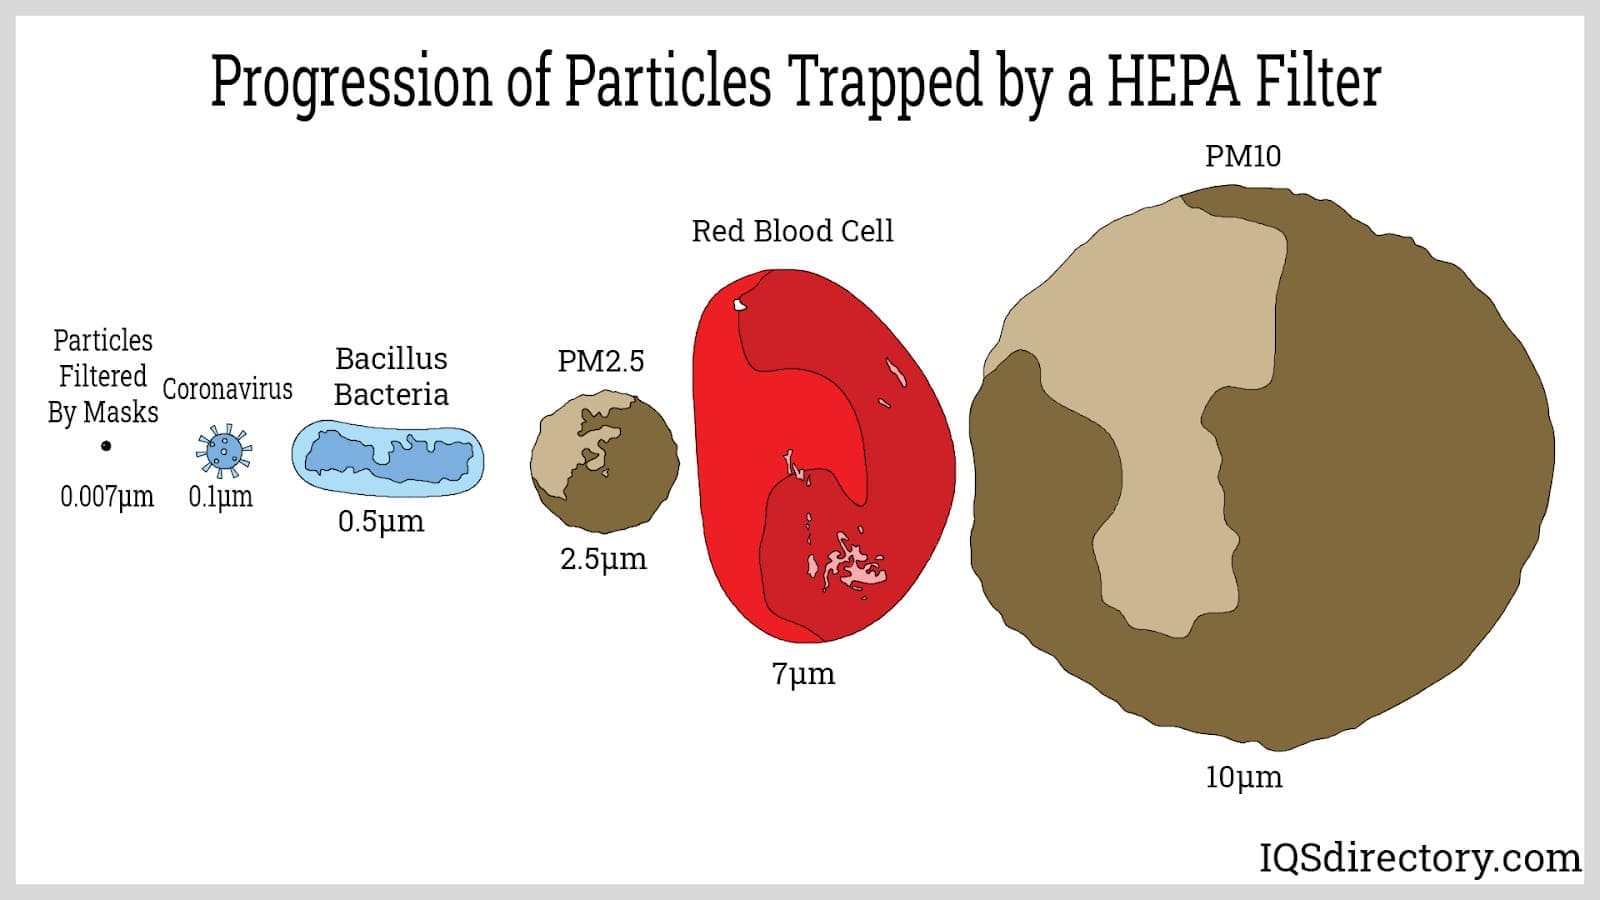 Progression of Particles Trapped by a HEPA Filter